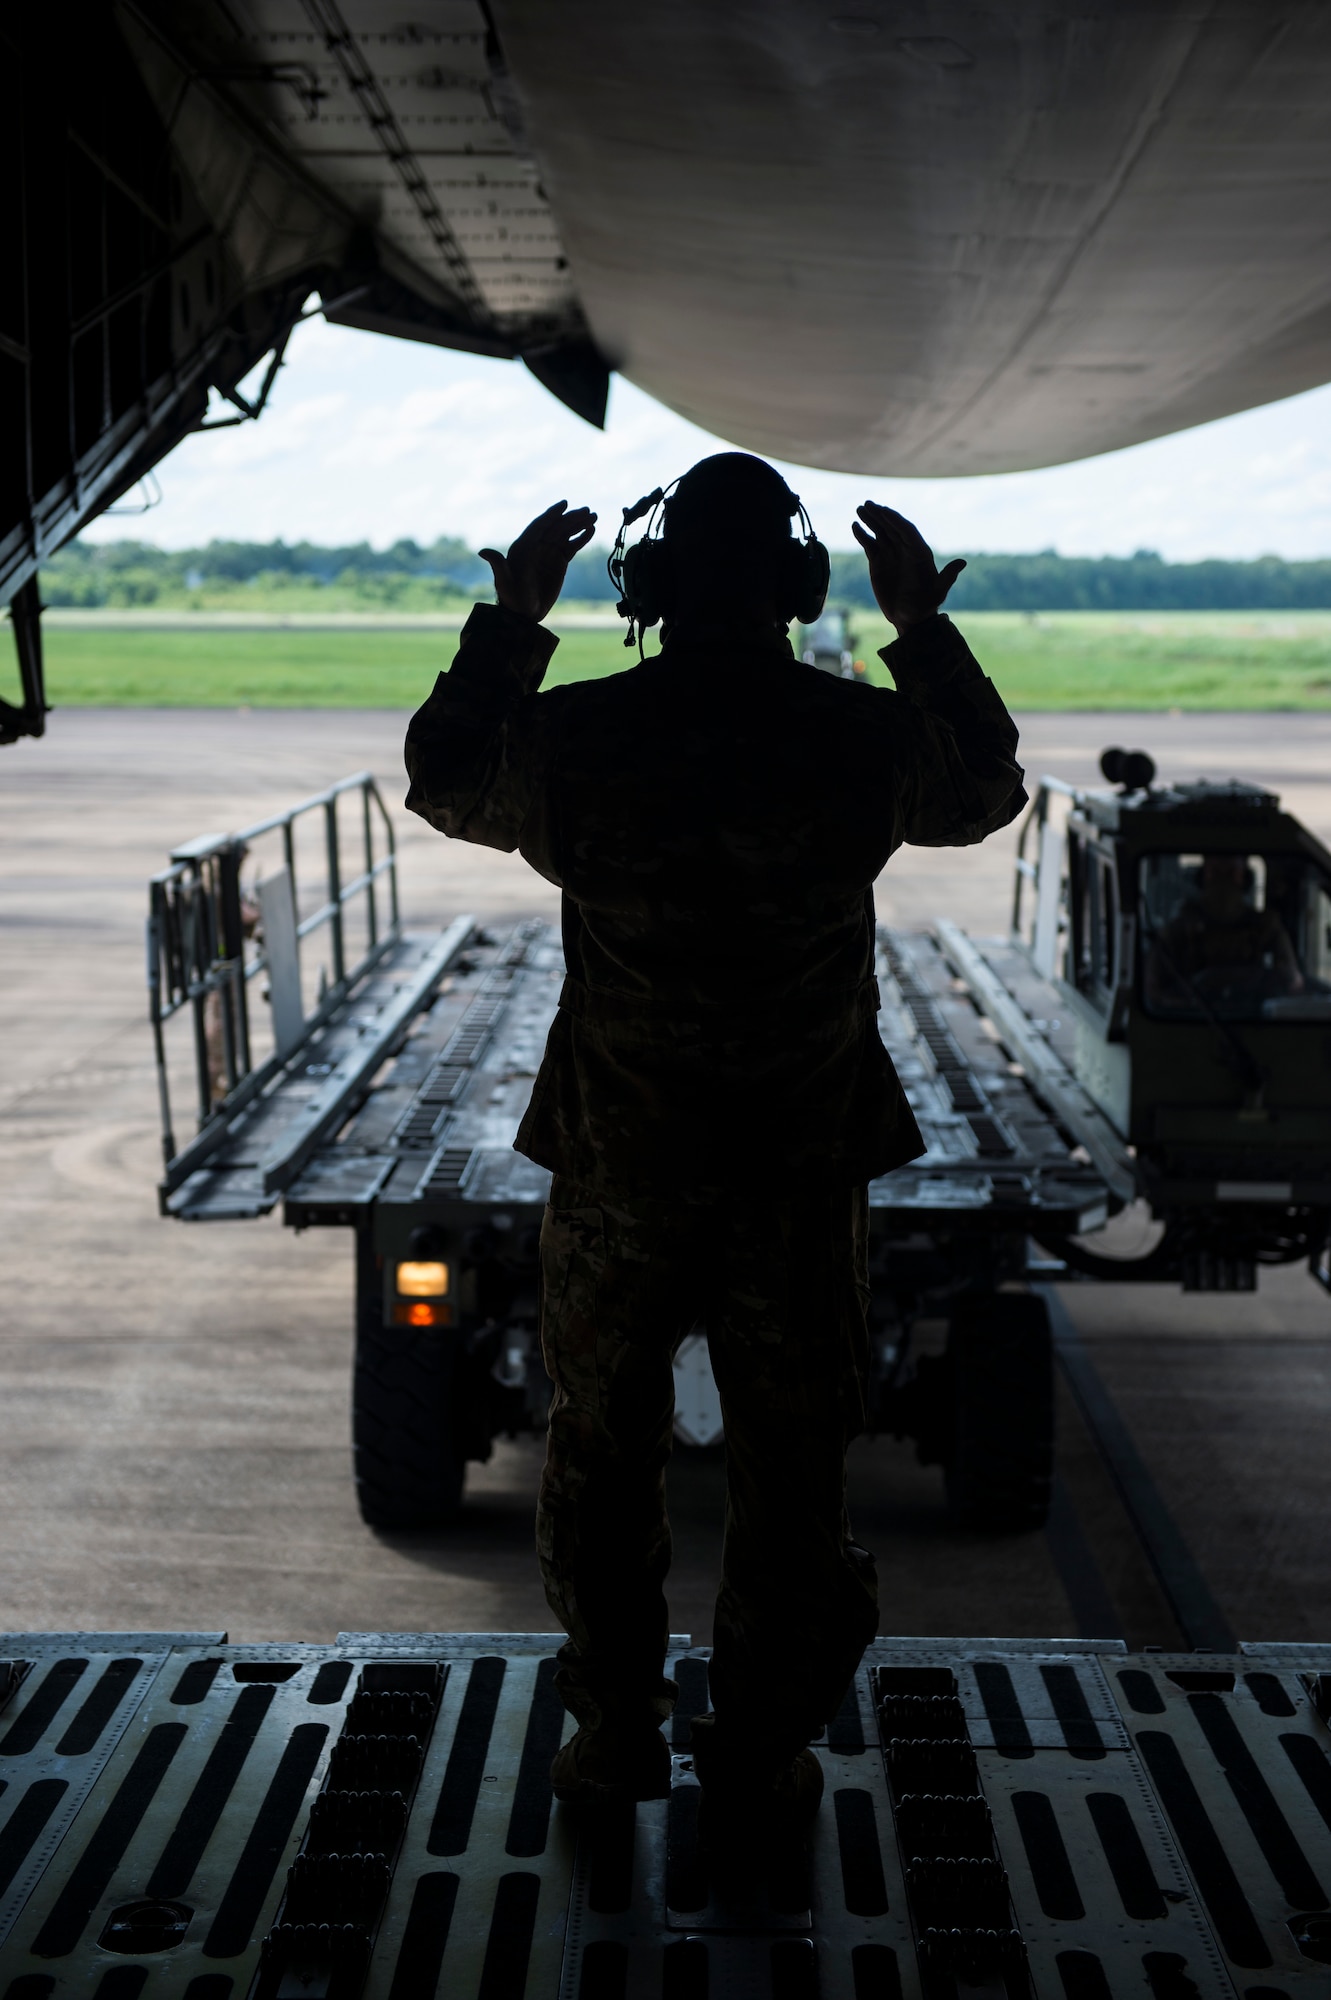 Airman 1st Class Jordan Gibson, 9th Airlift Squadron loadmaster, marshals a 60K Tunner cargo loader to a C-5M Super Galaxy July 29, 2020, at Alexandria International Airport, Louisiana. Air Force active-duty, Reserve, and Air National Guard Airmen as well as civilian counterparts participated in Exercise Swamp Devil to test their capabilities on responding to humanitarian aid and disaster relief missions during the COVID-19 pandemic. (U.S. Air Force photo by Staff Sgt. Sarah Brice)